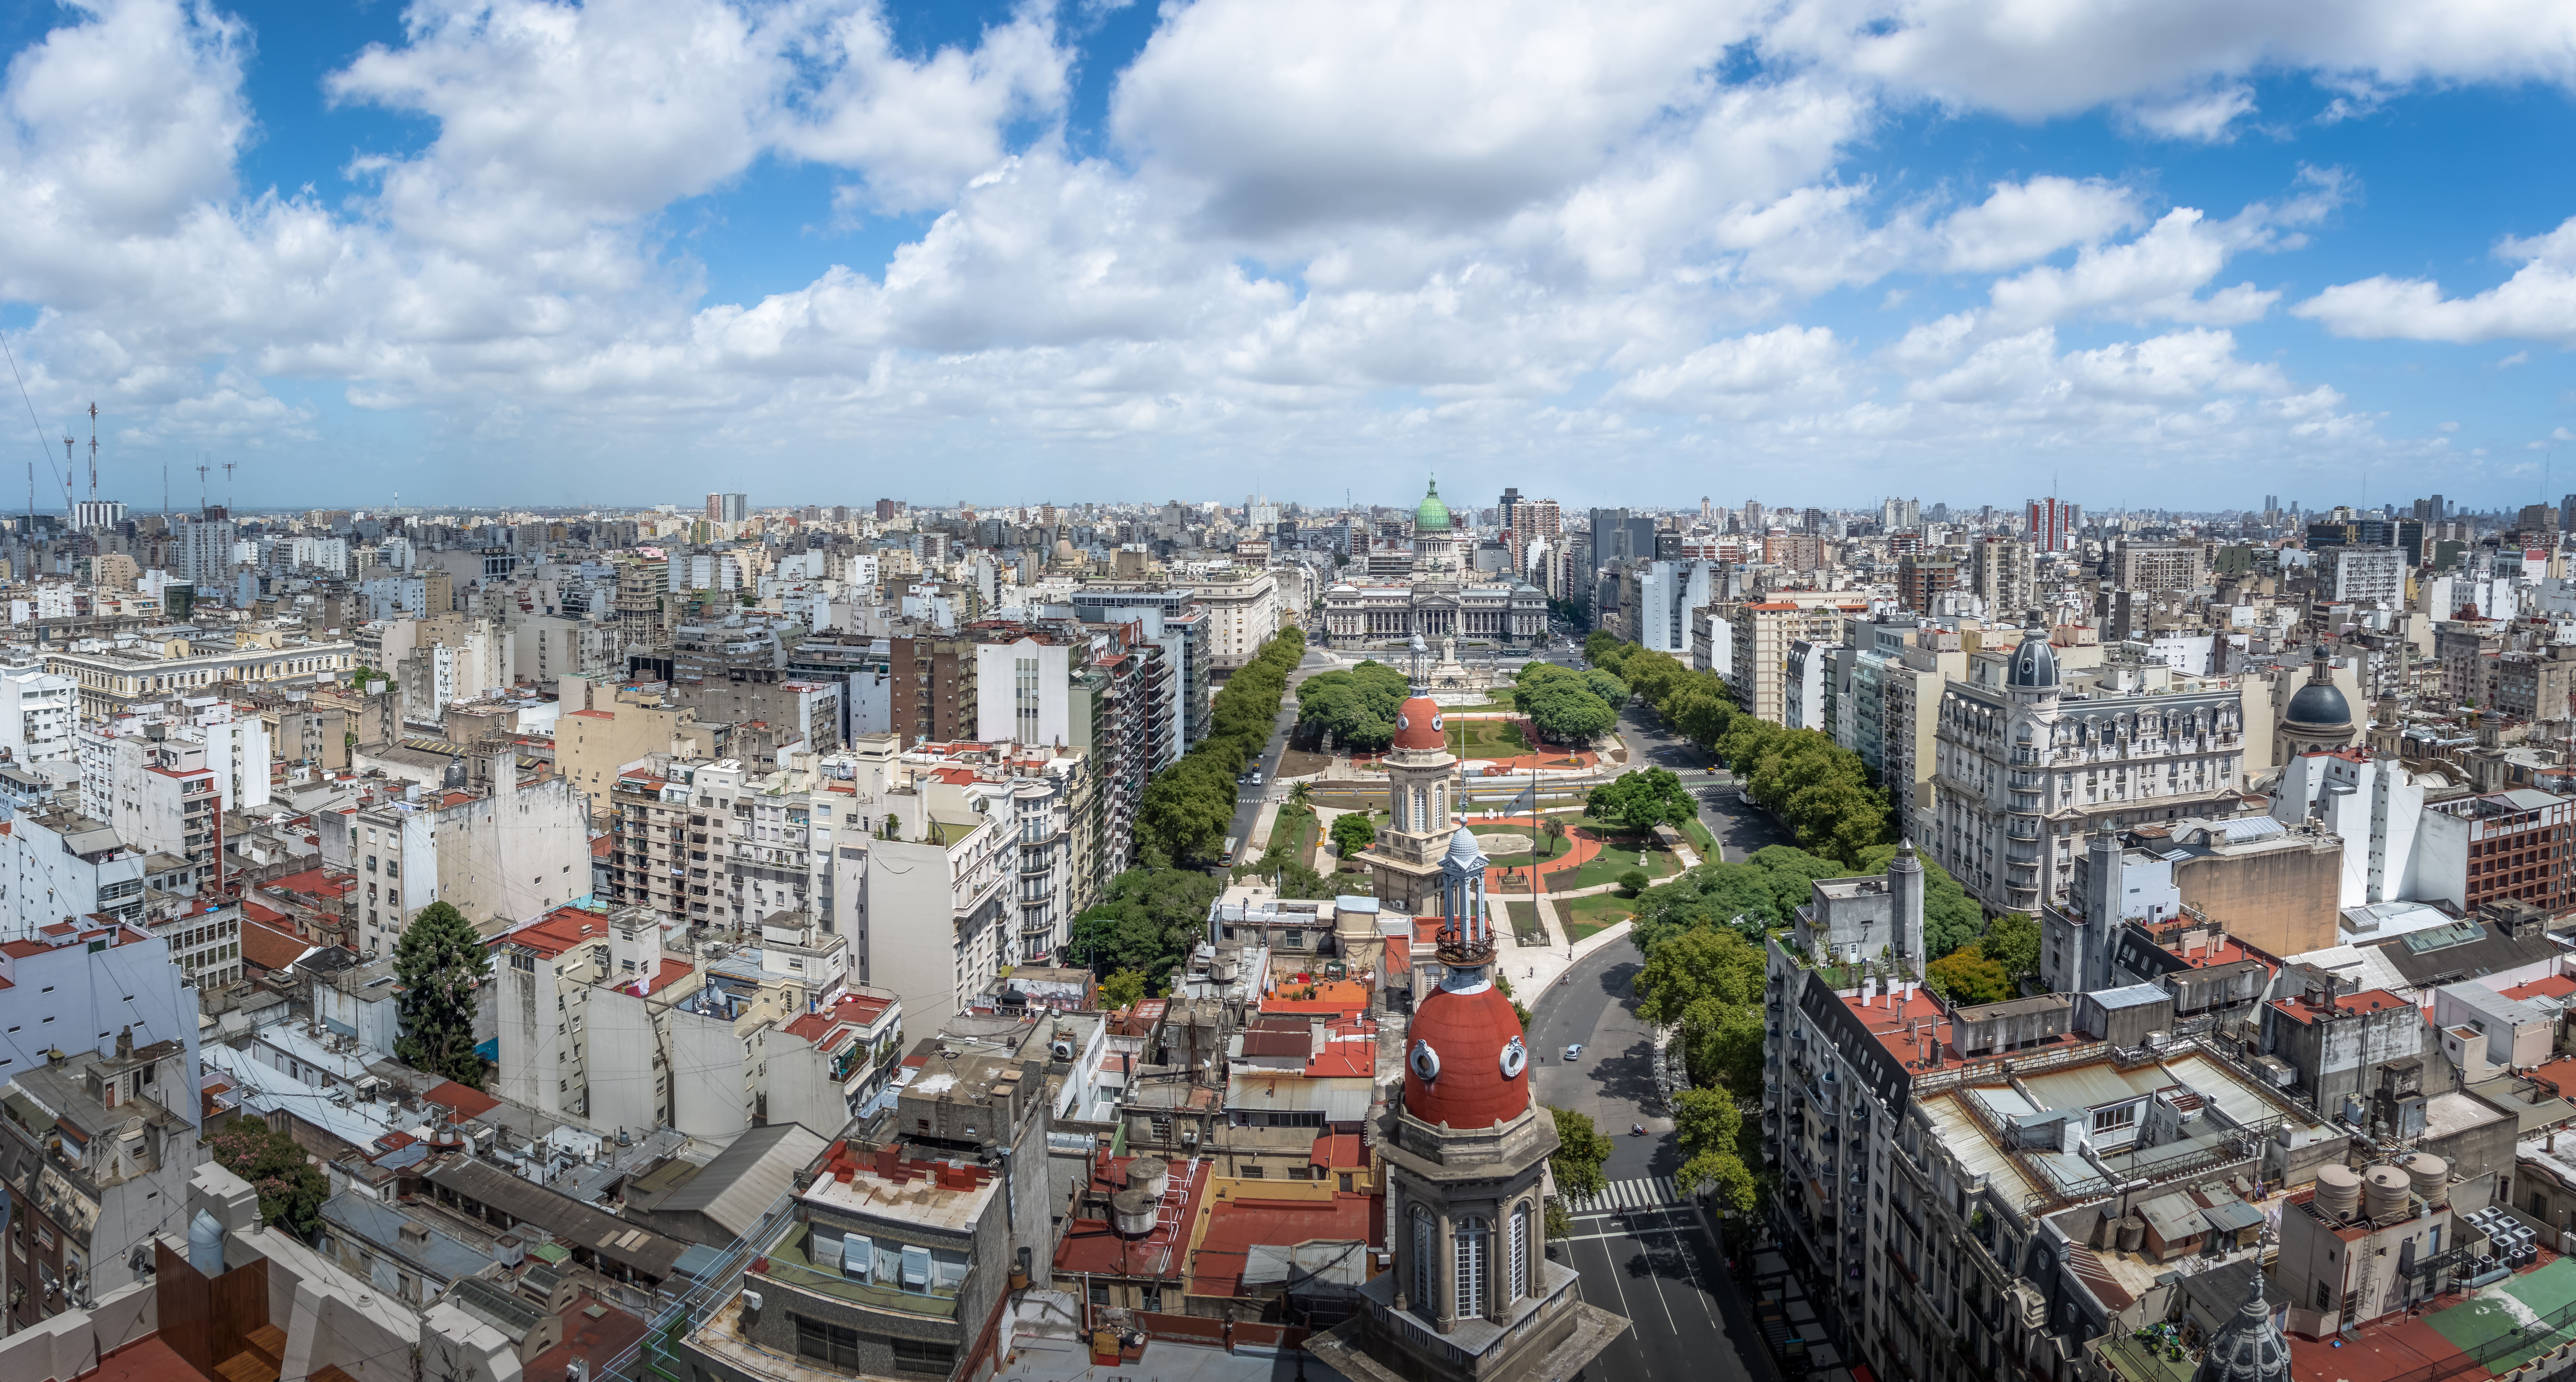 panoramic-aerial-view-of-buenos-aires-and-plaza-co-2022-03-02-12-15-06-utc (1)